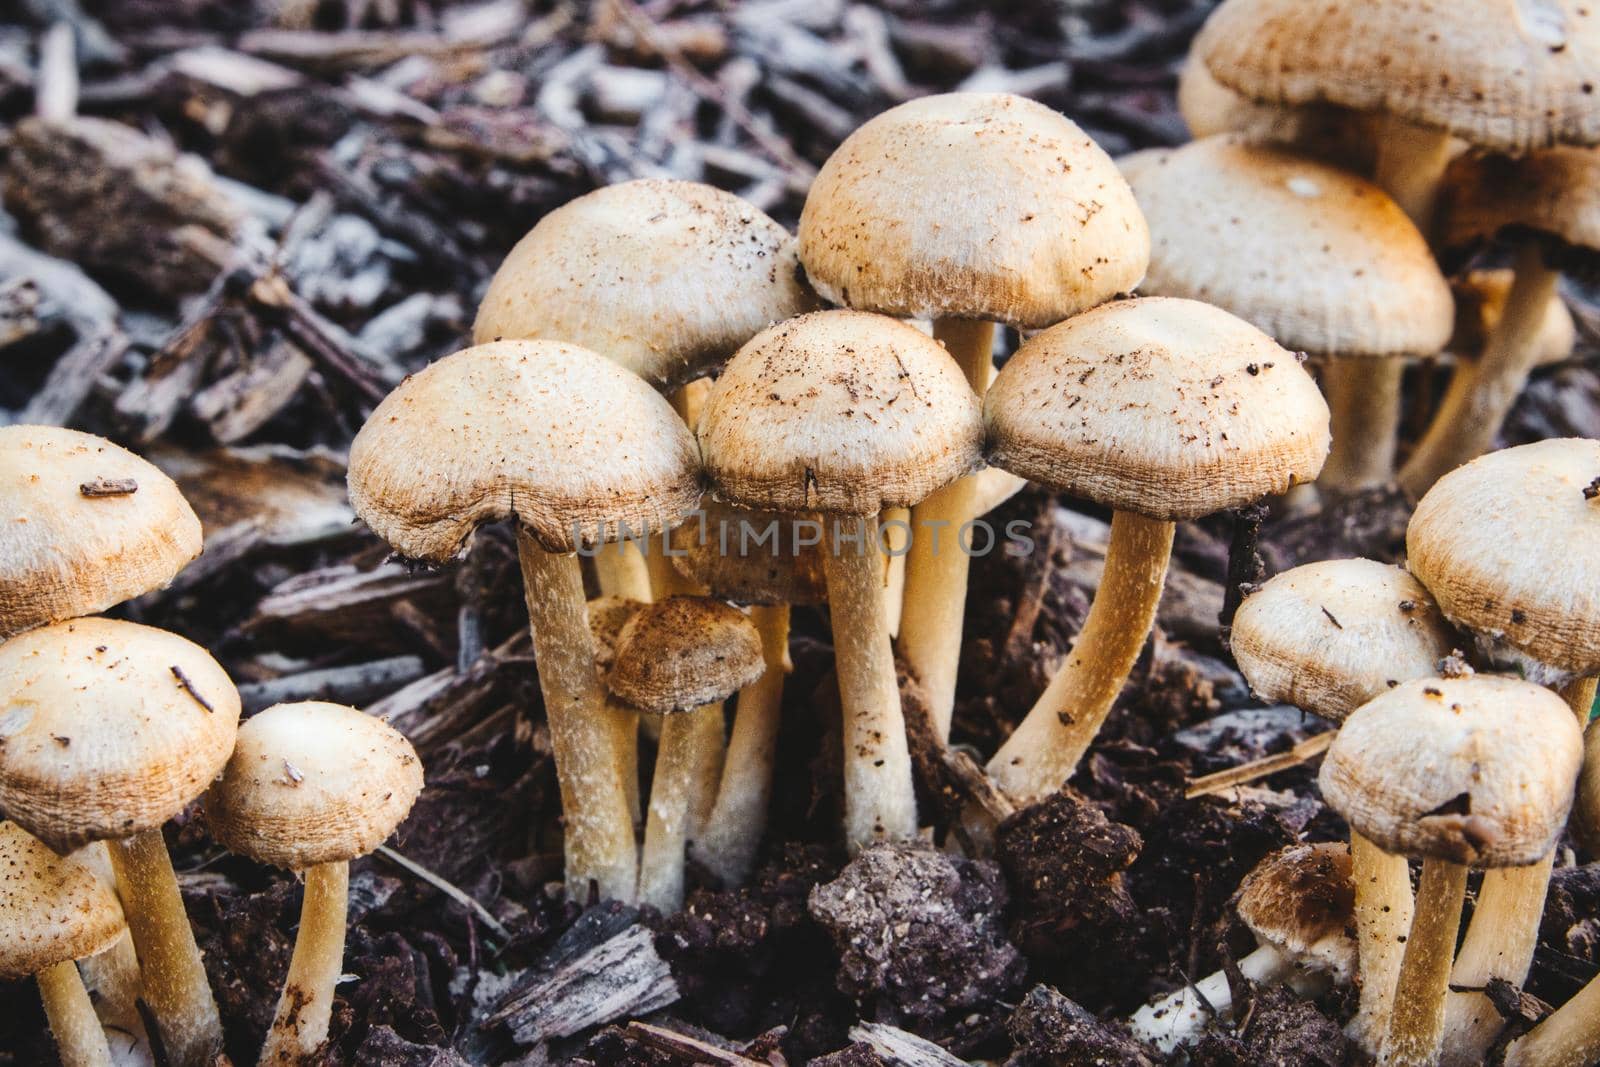 A cluster of Mulch Maids (Leratiomyces percevalii) mushrooms growing on the forest floor